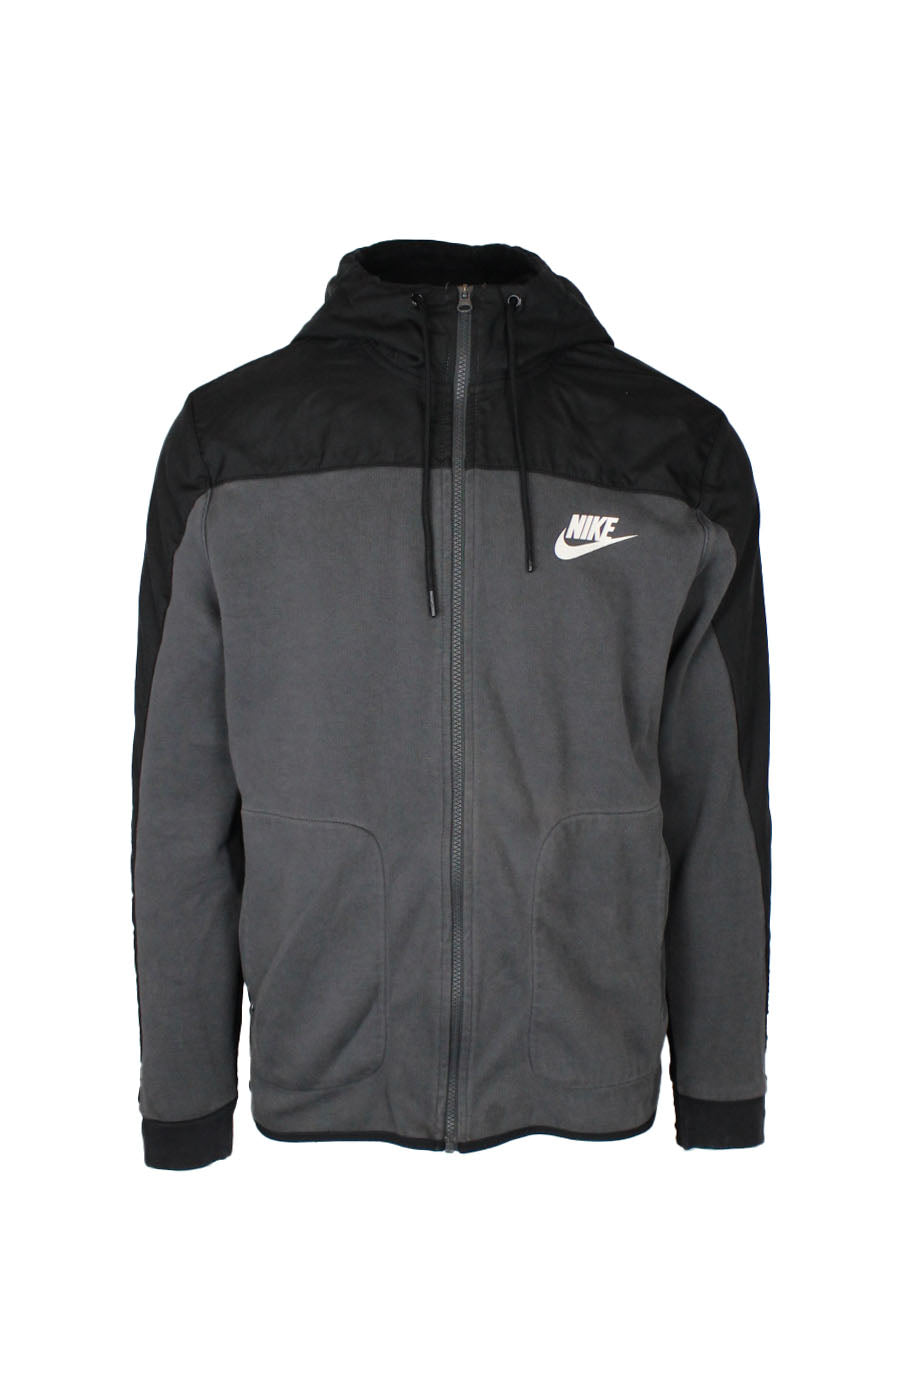 front view of nike black/charcoal zip up sweatshirt. features ‘nike’ logo printed at left breast, side zip hand pockets, elastic at cuffs/hem, drawstrings at hood, and nylon panels throughout.